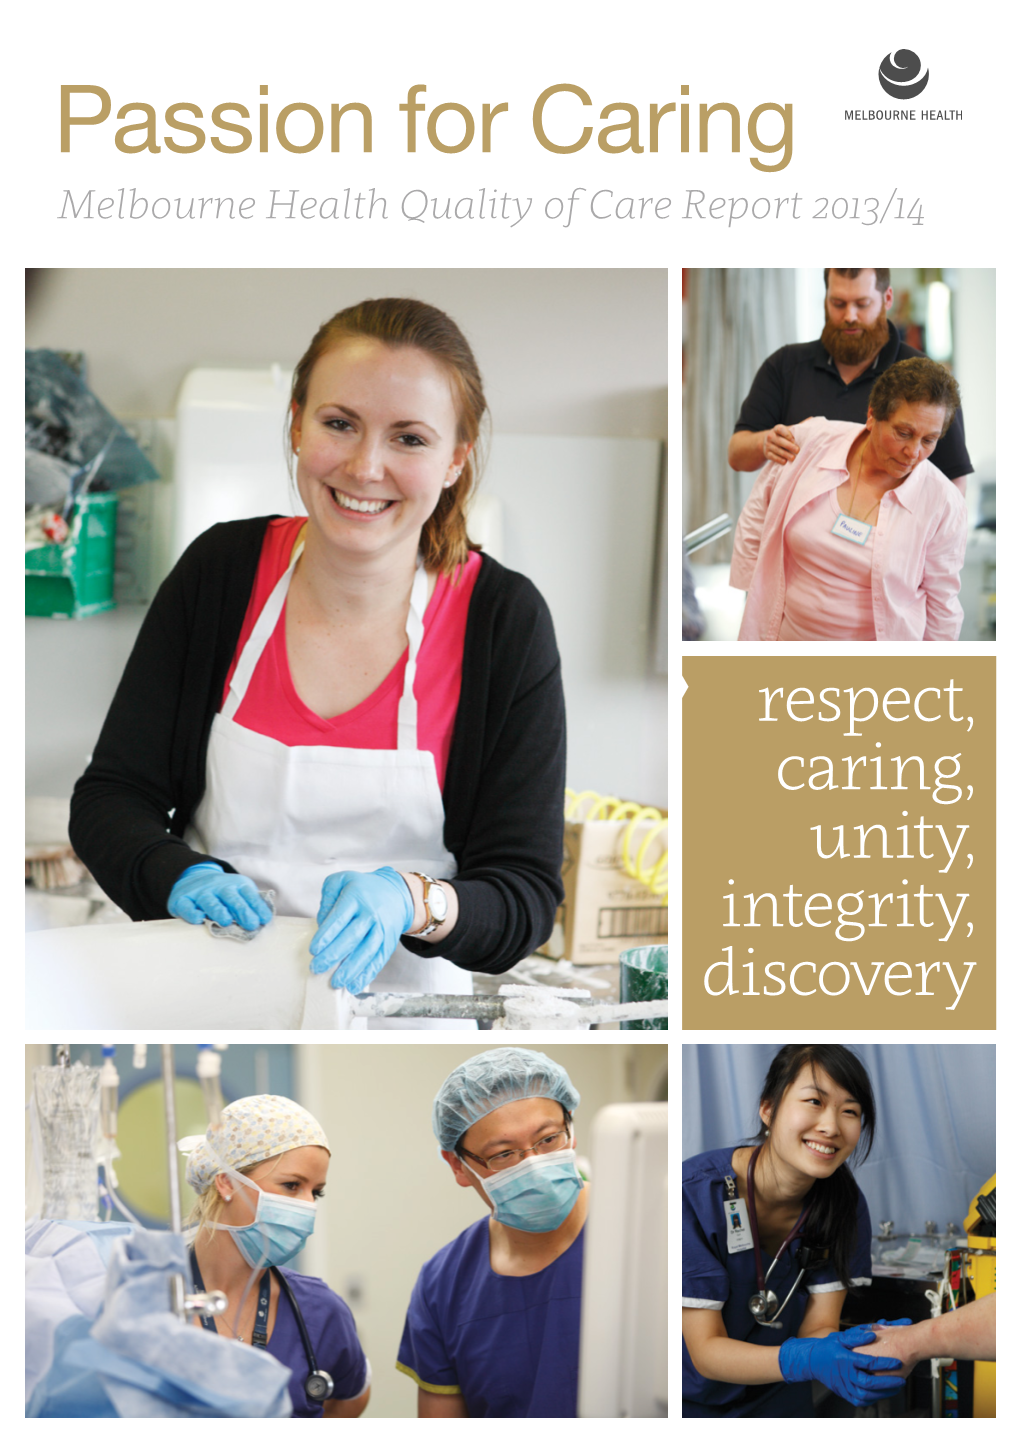 Passion for Caring Melbourne Health Quality of Care Report 2013/14